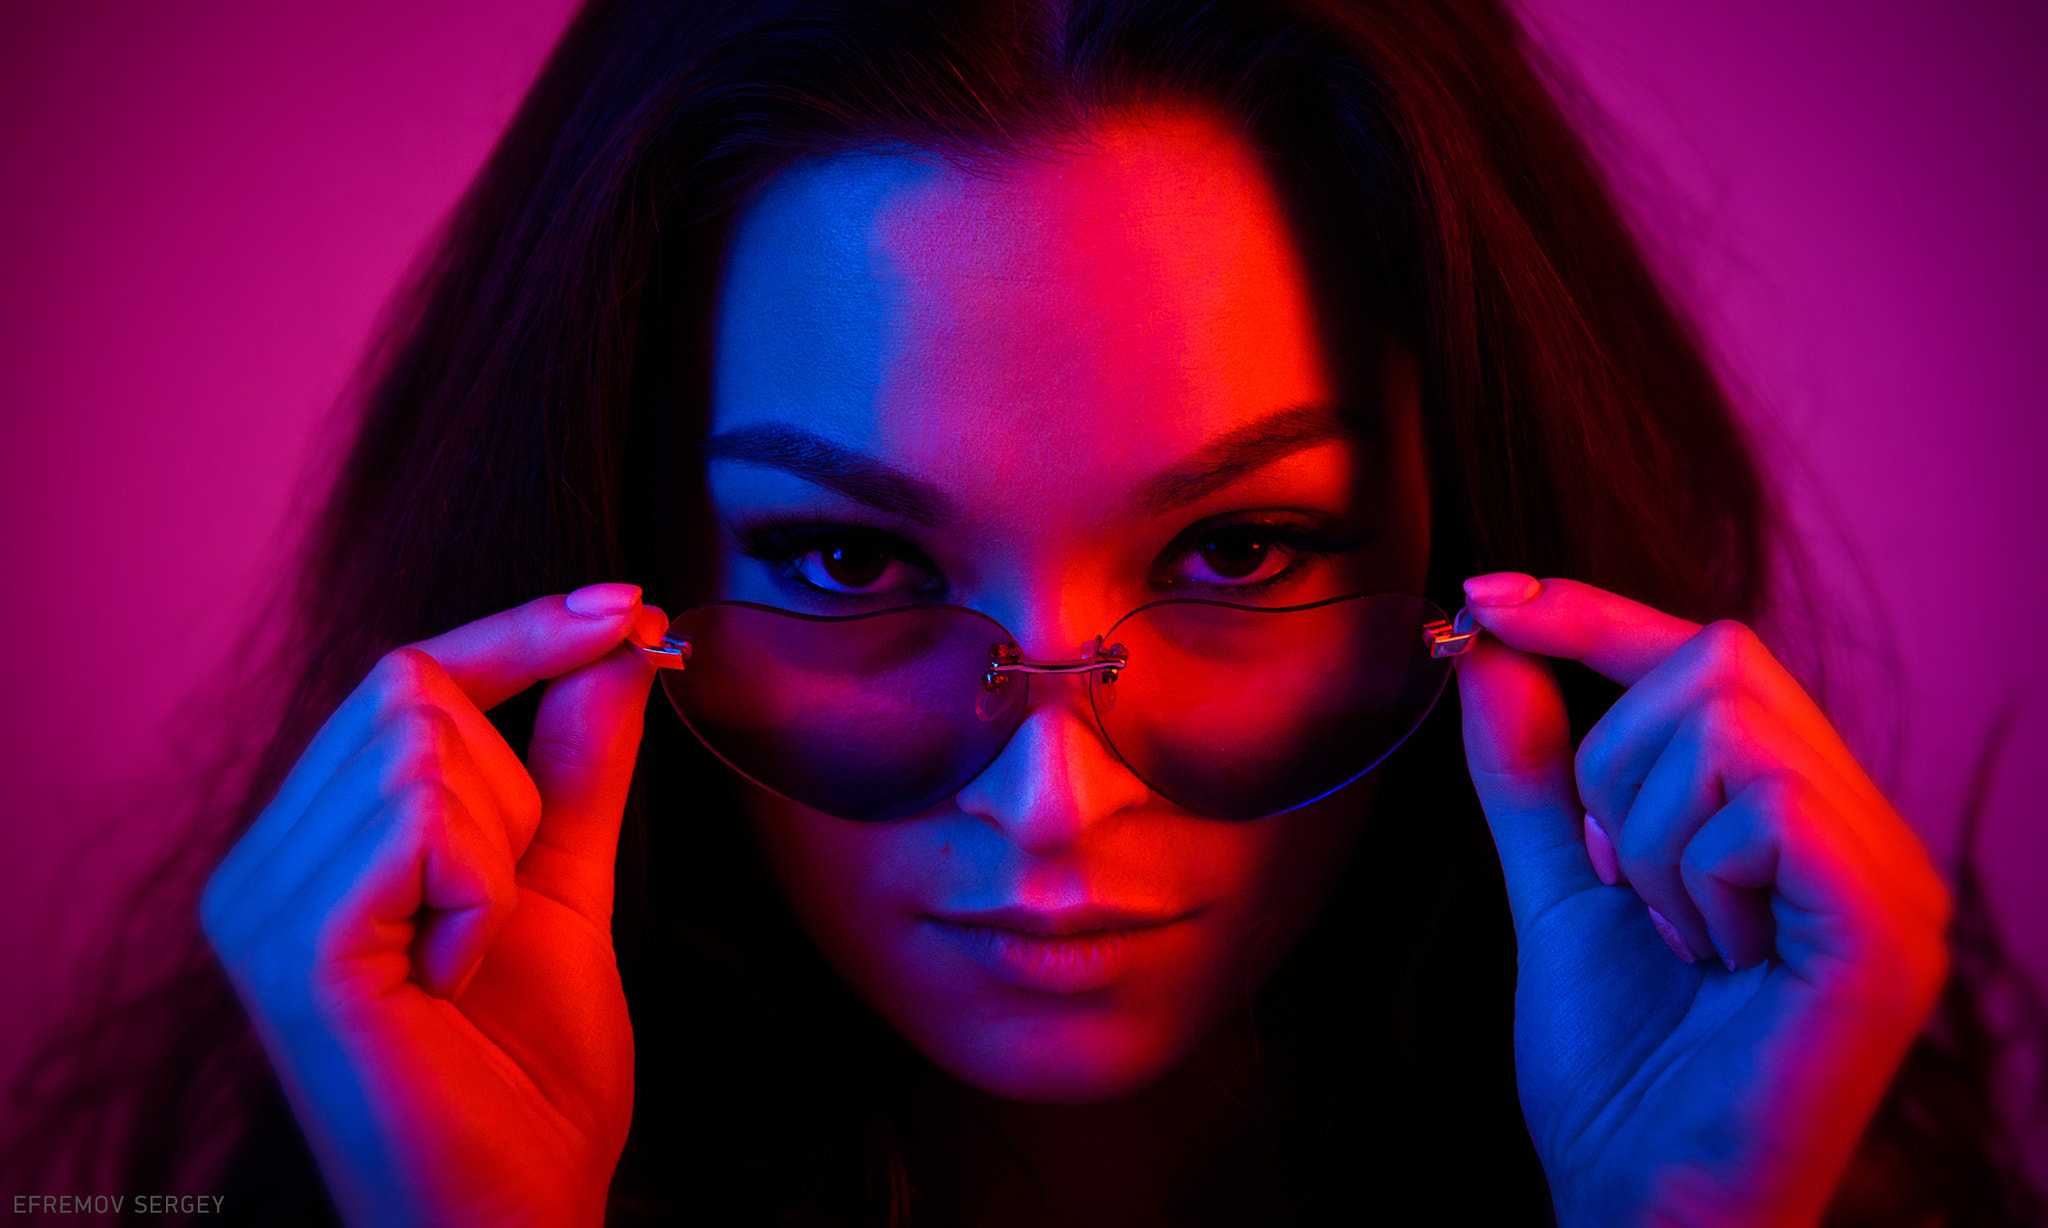 Women Face Portrait Women With Glasses Neon Sergey Efremov Touching Glasses Red Purple 2048x1228